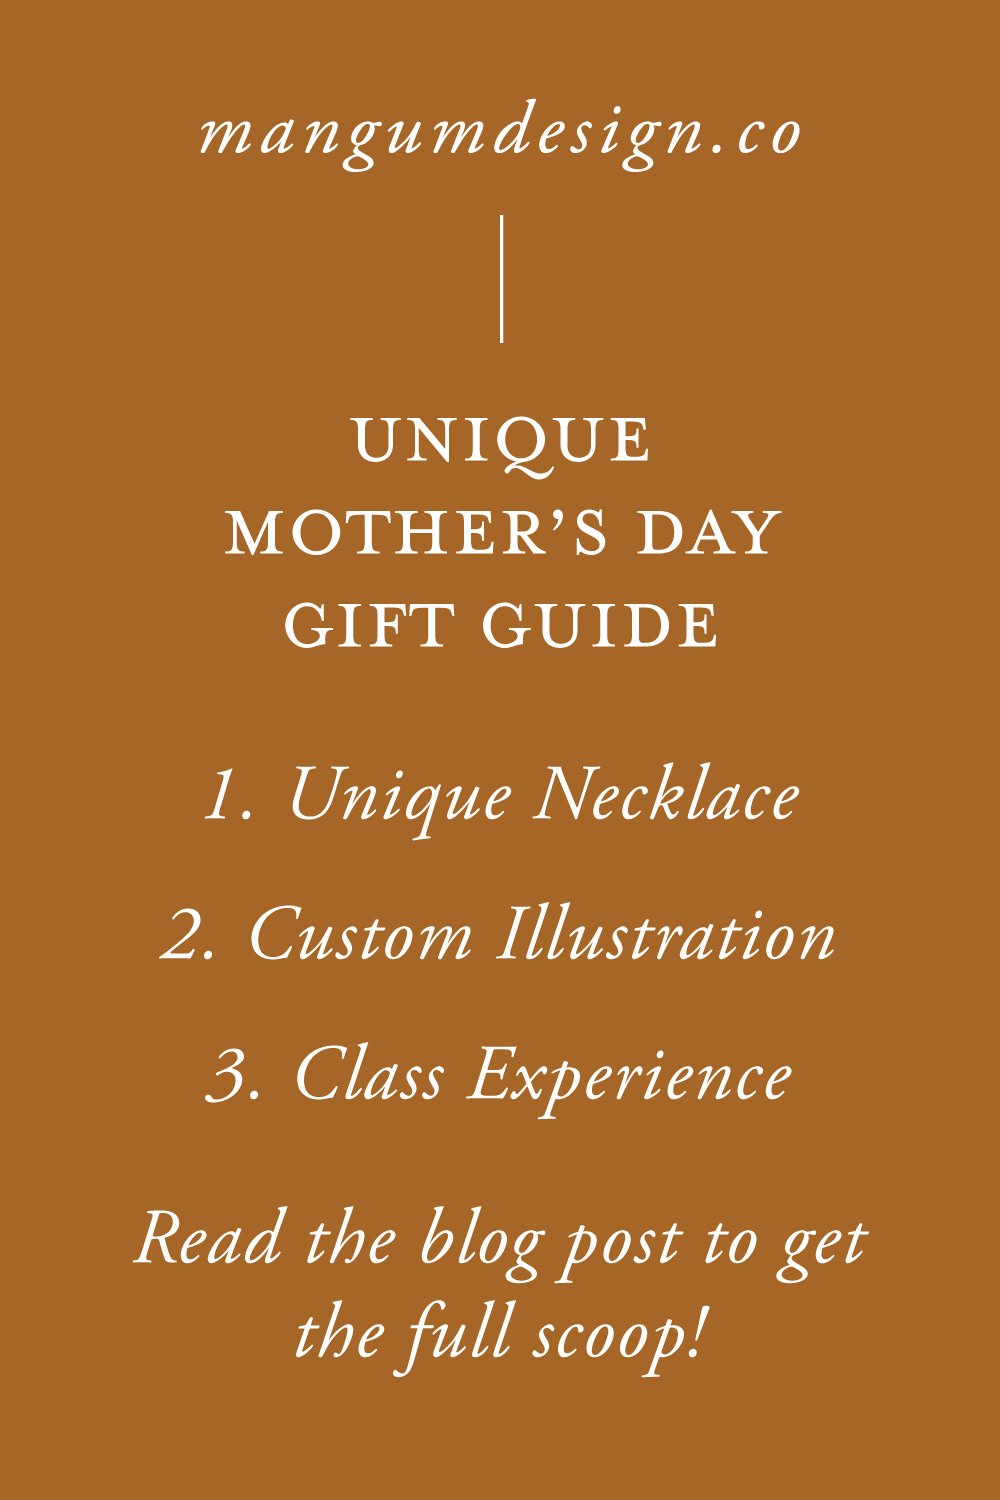  This list contains the perfect Mother’s Day gift ideas for the women in your life. #mangumdesignco #mothersdaygiftguide #mothersday #giftidea #sentimentalgifts #customgiftideas #customillustrations #personalizedjewelry 